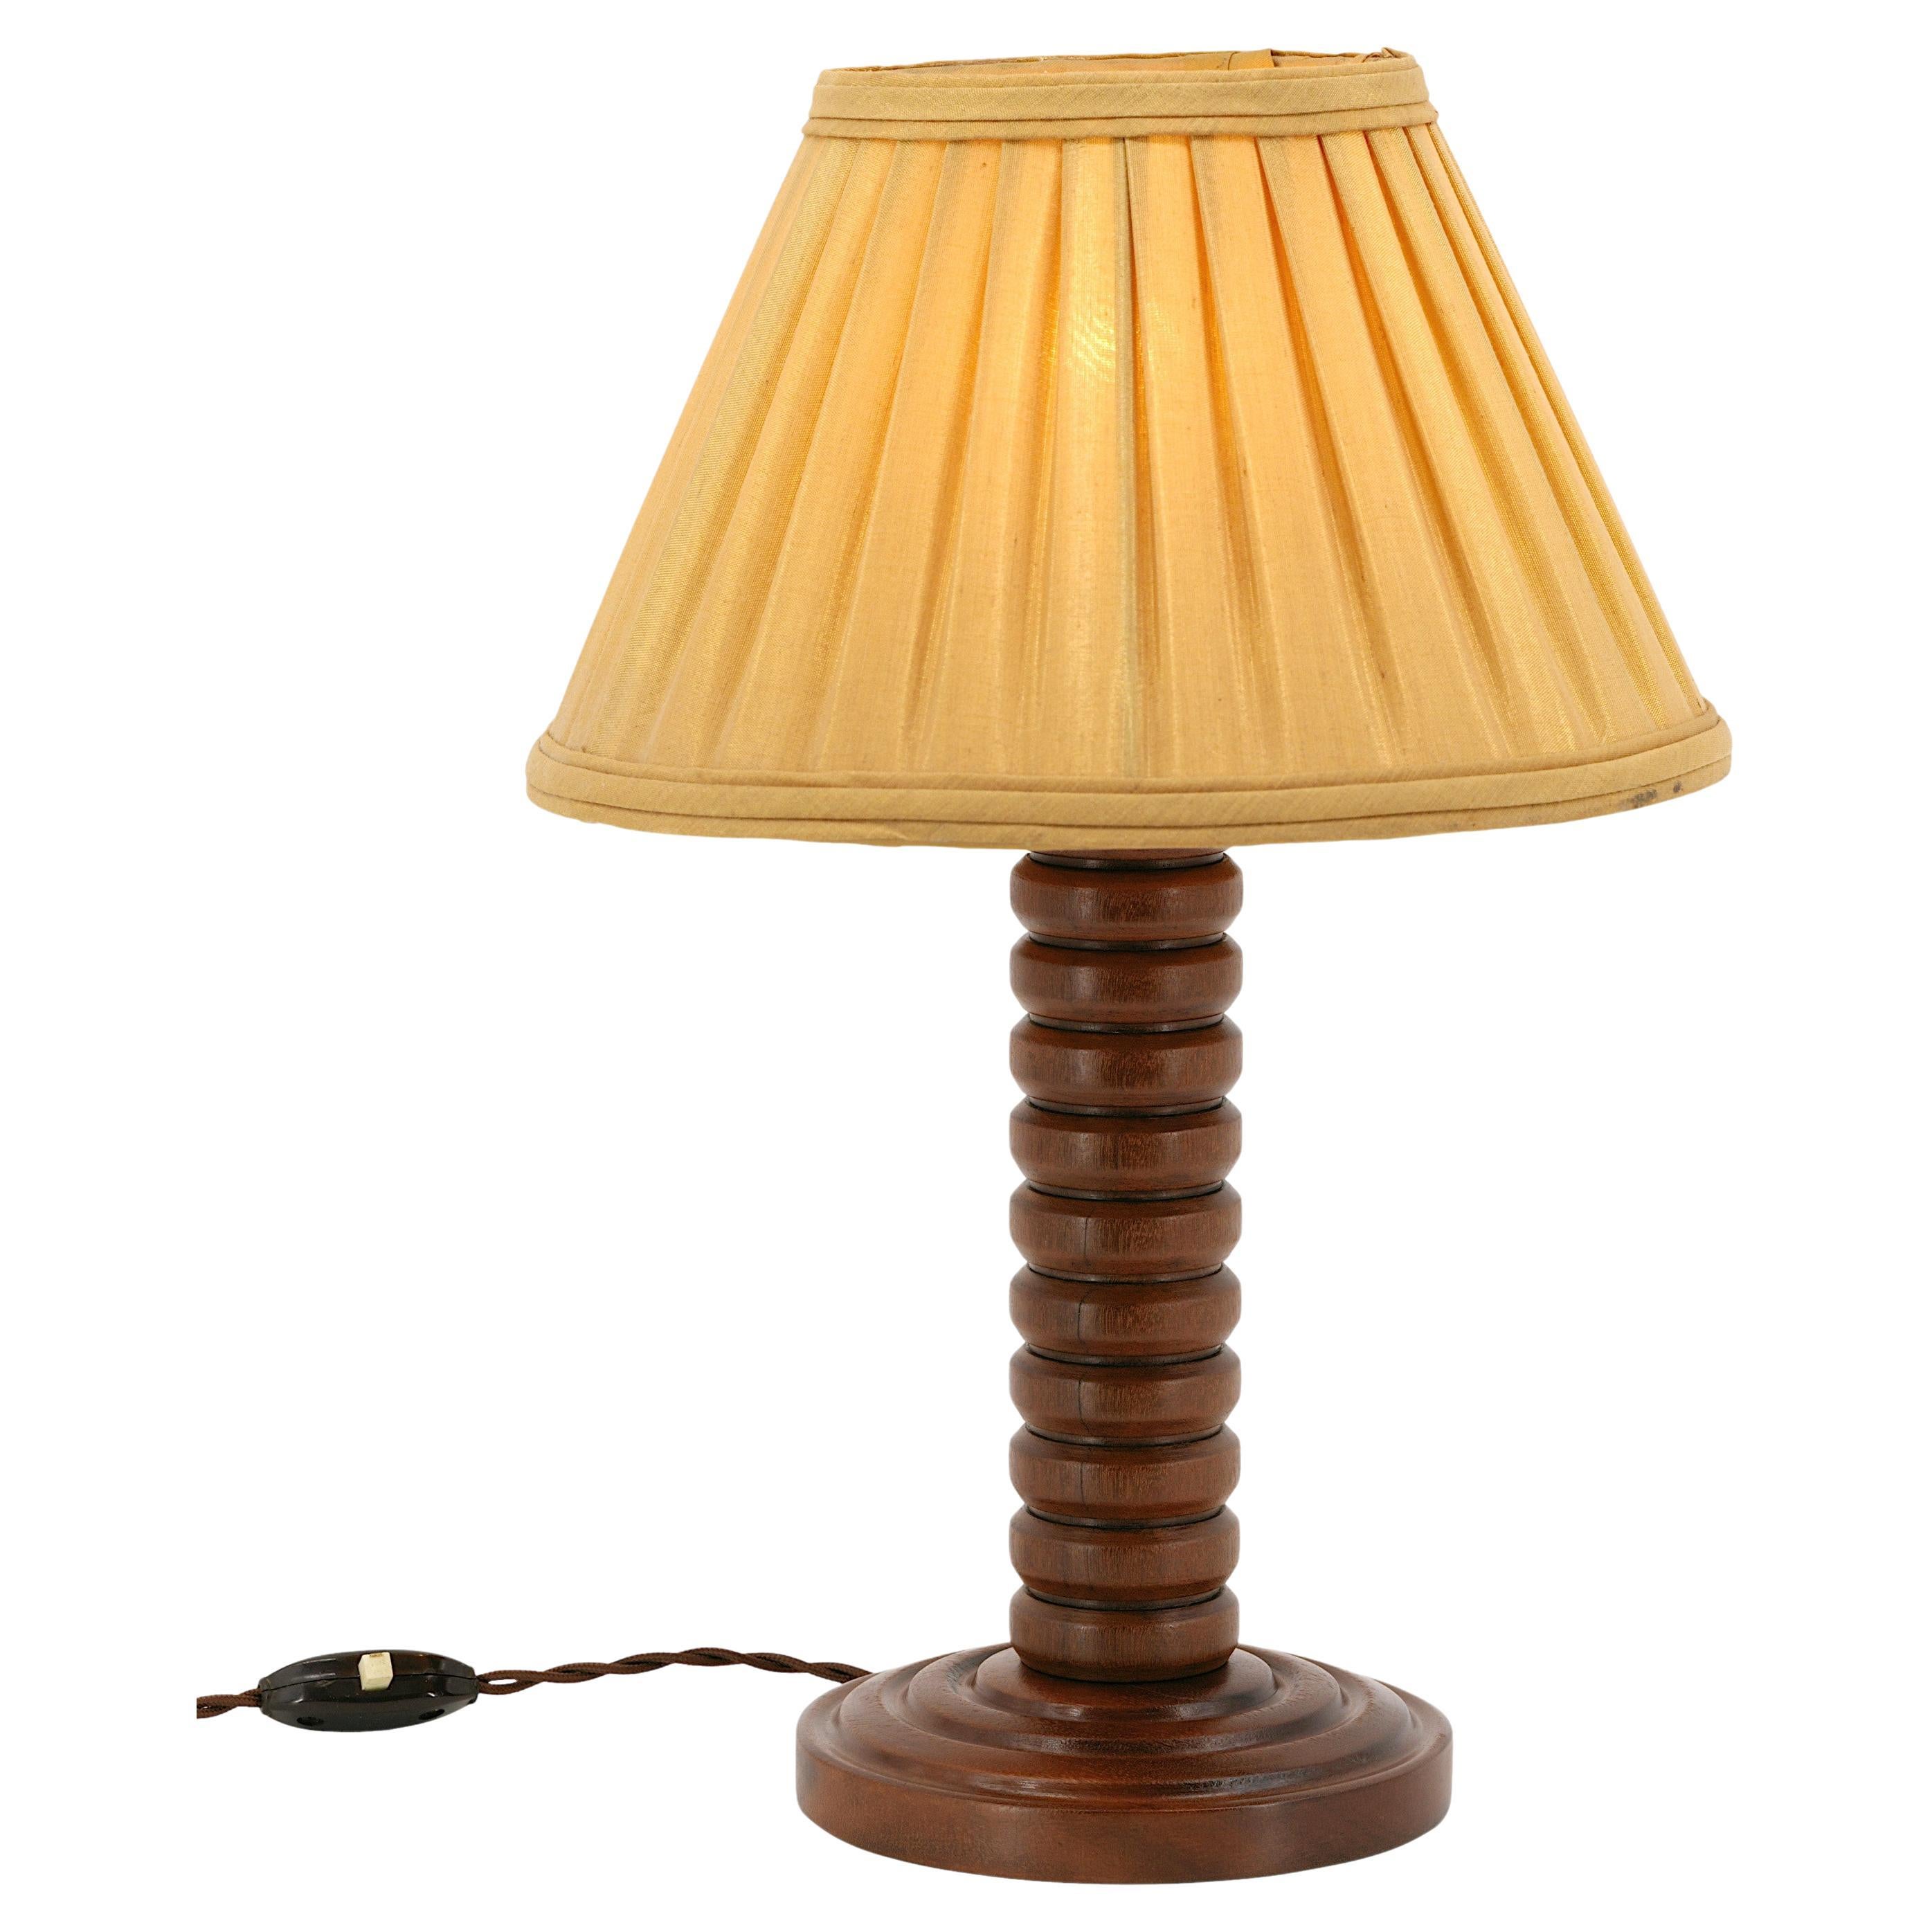 French Art Deco Wooden Table Lamp by Bouchard, 1930s For Sale